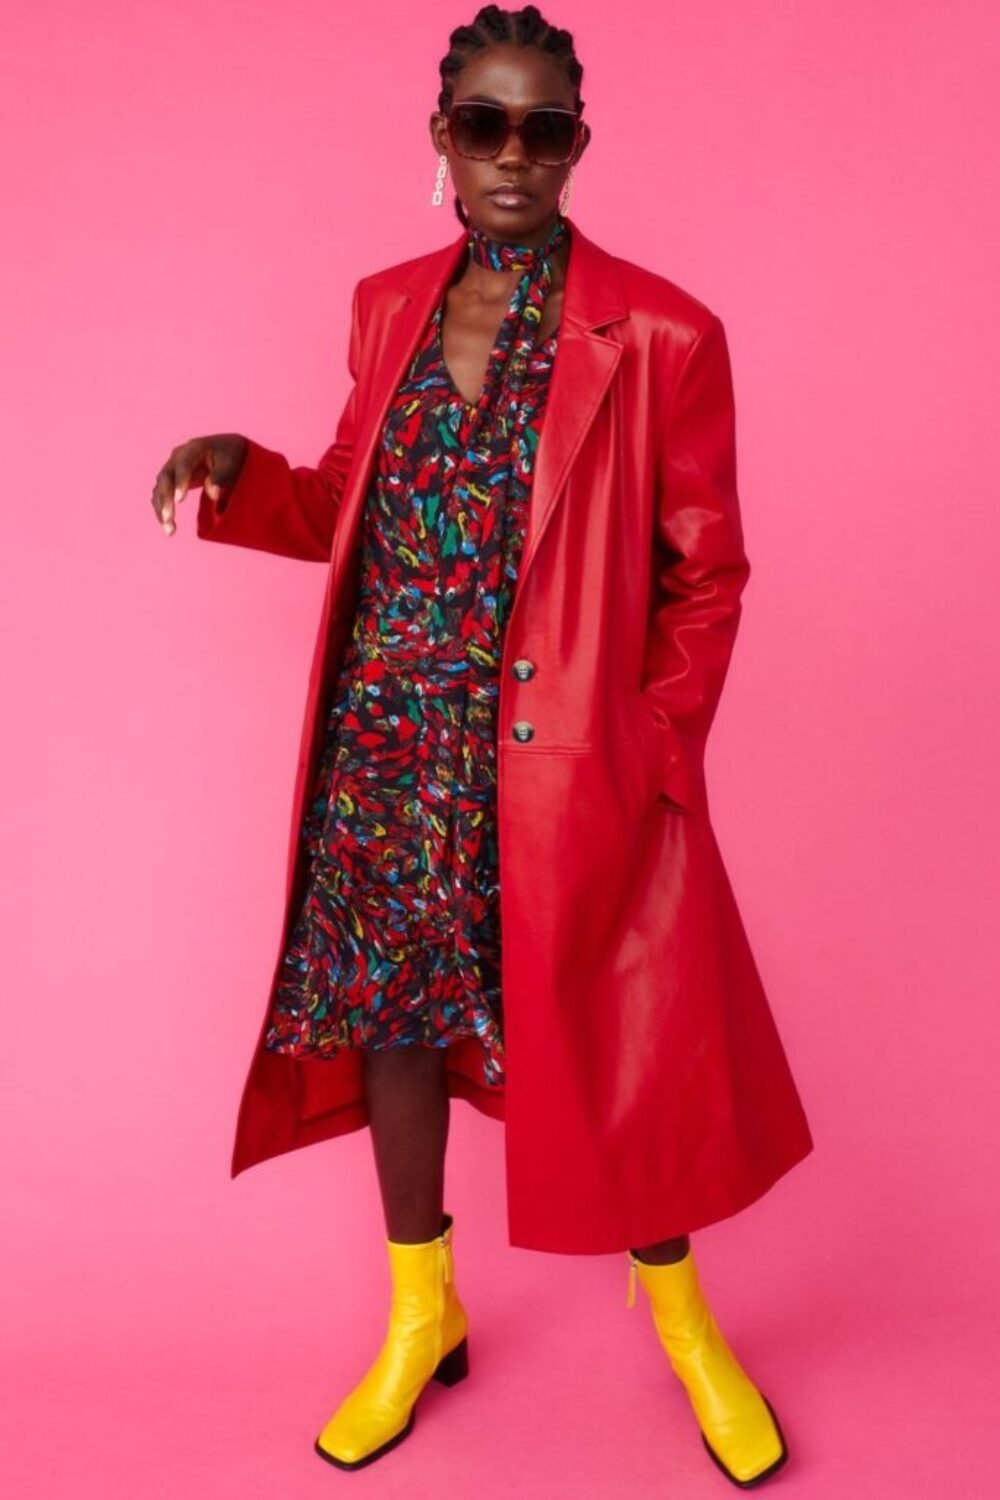 Shop Lux Red Eco Leather Trench Coat and women's luxury and designer clothes at www.lux-apparel.co.uk